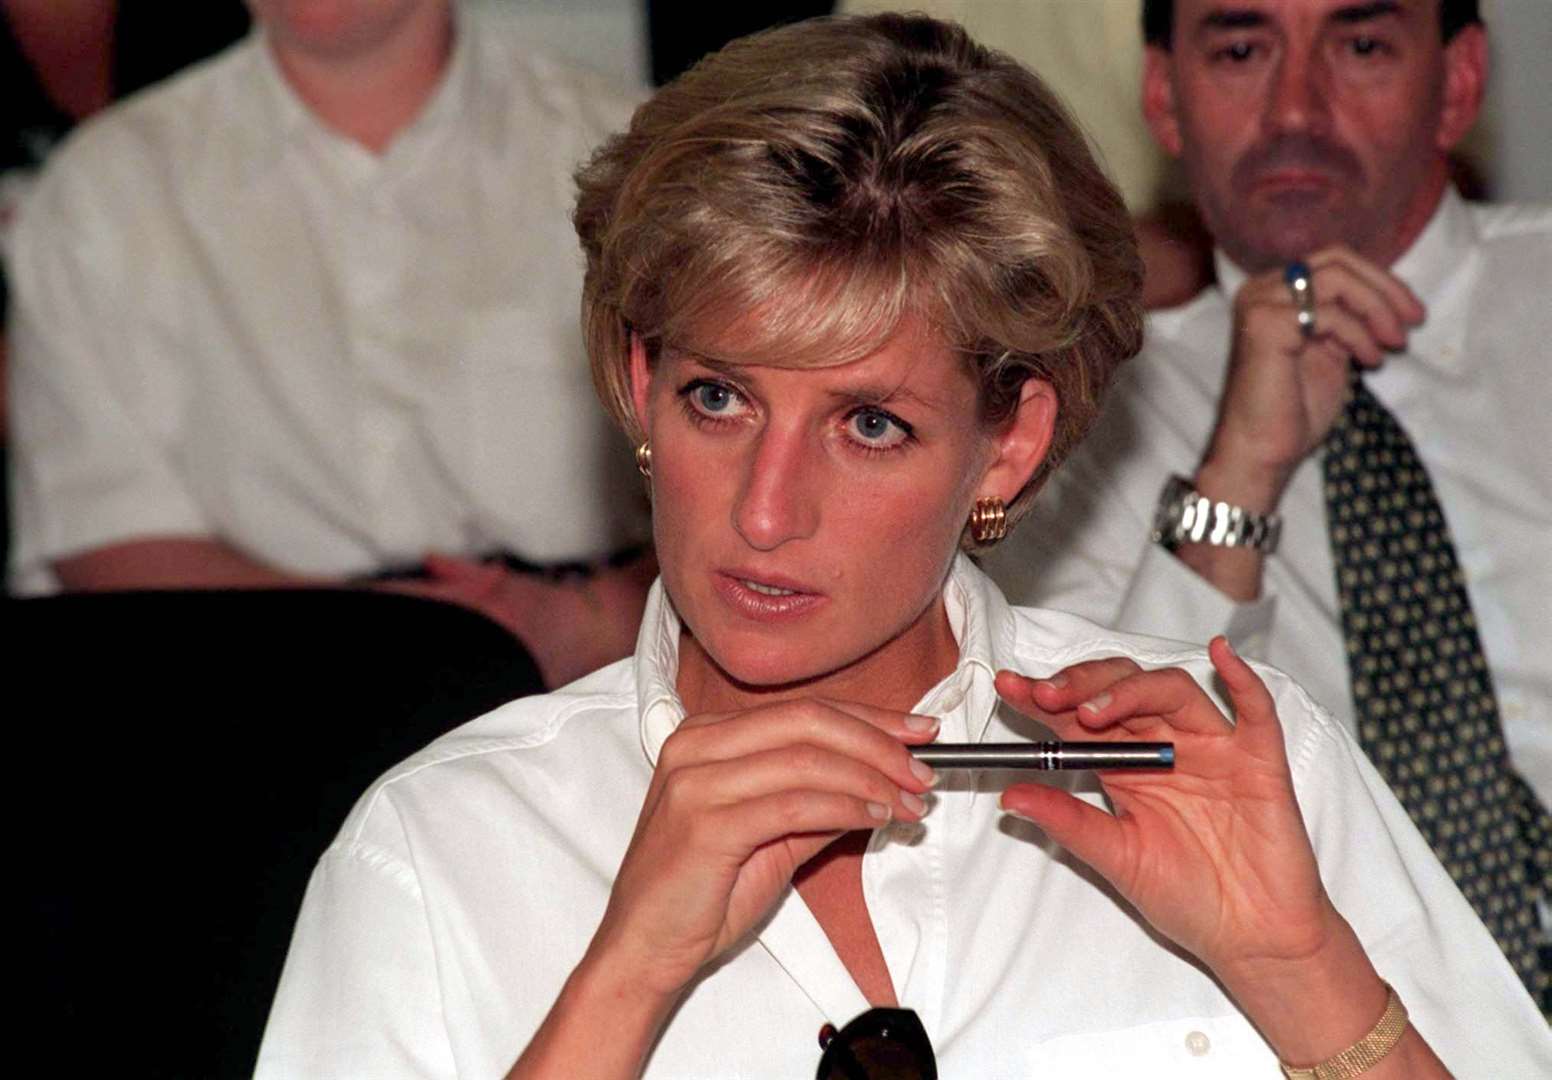 During her bombshell Panorama interview Diana declared “Well, there were three of us in this marriage, so it was a bit crowded”. John Stillwell/PA Wire